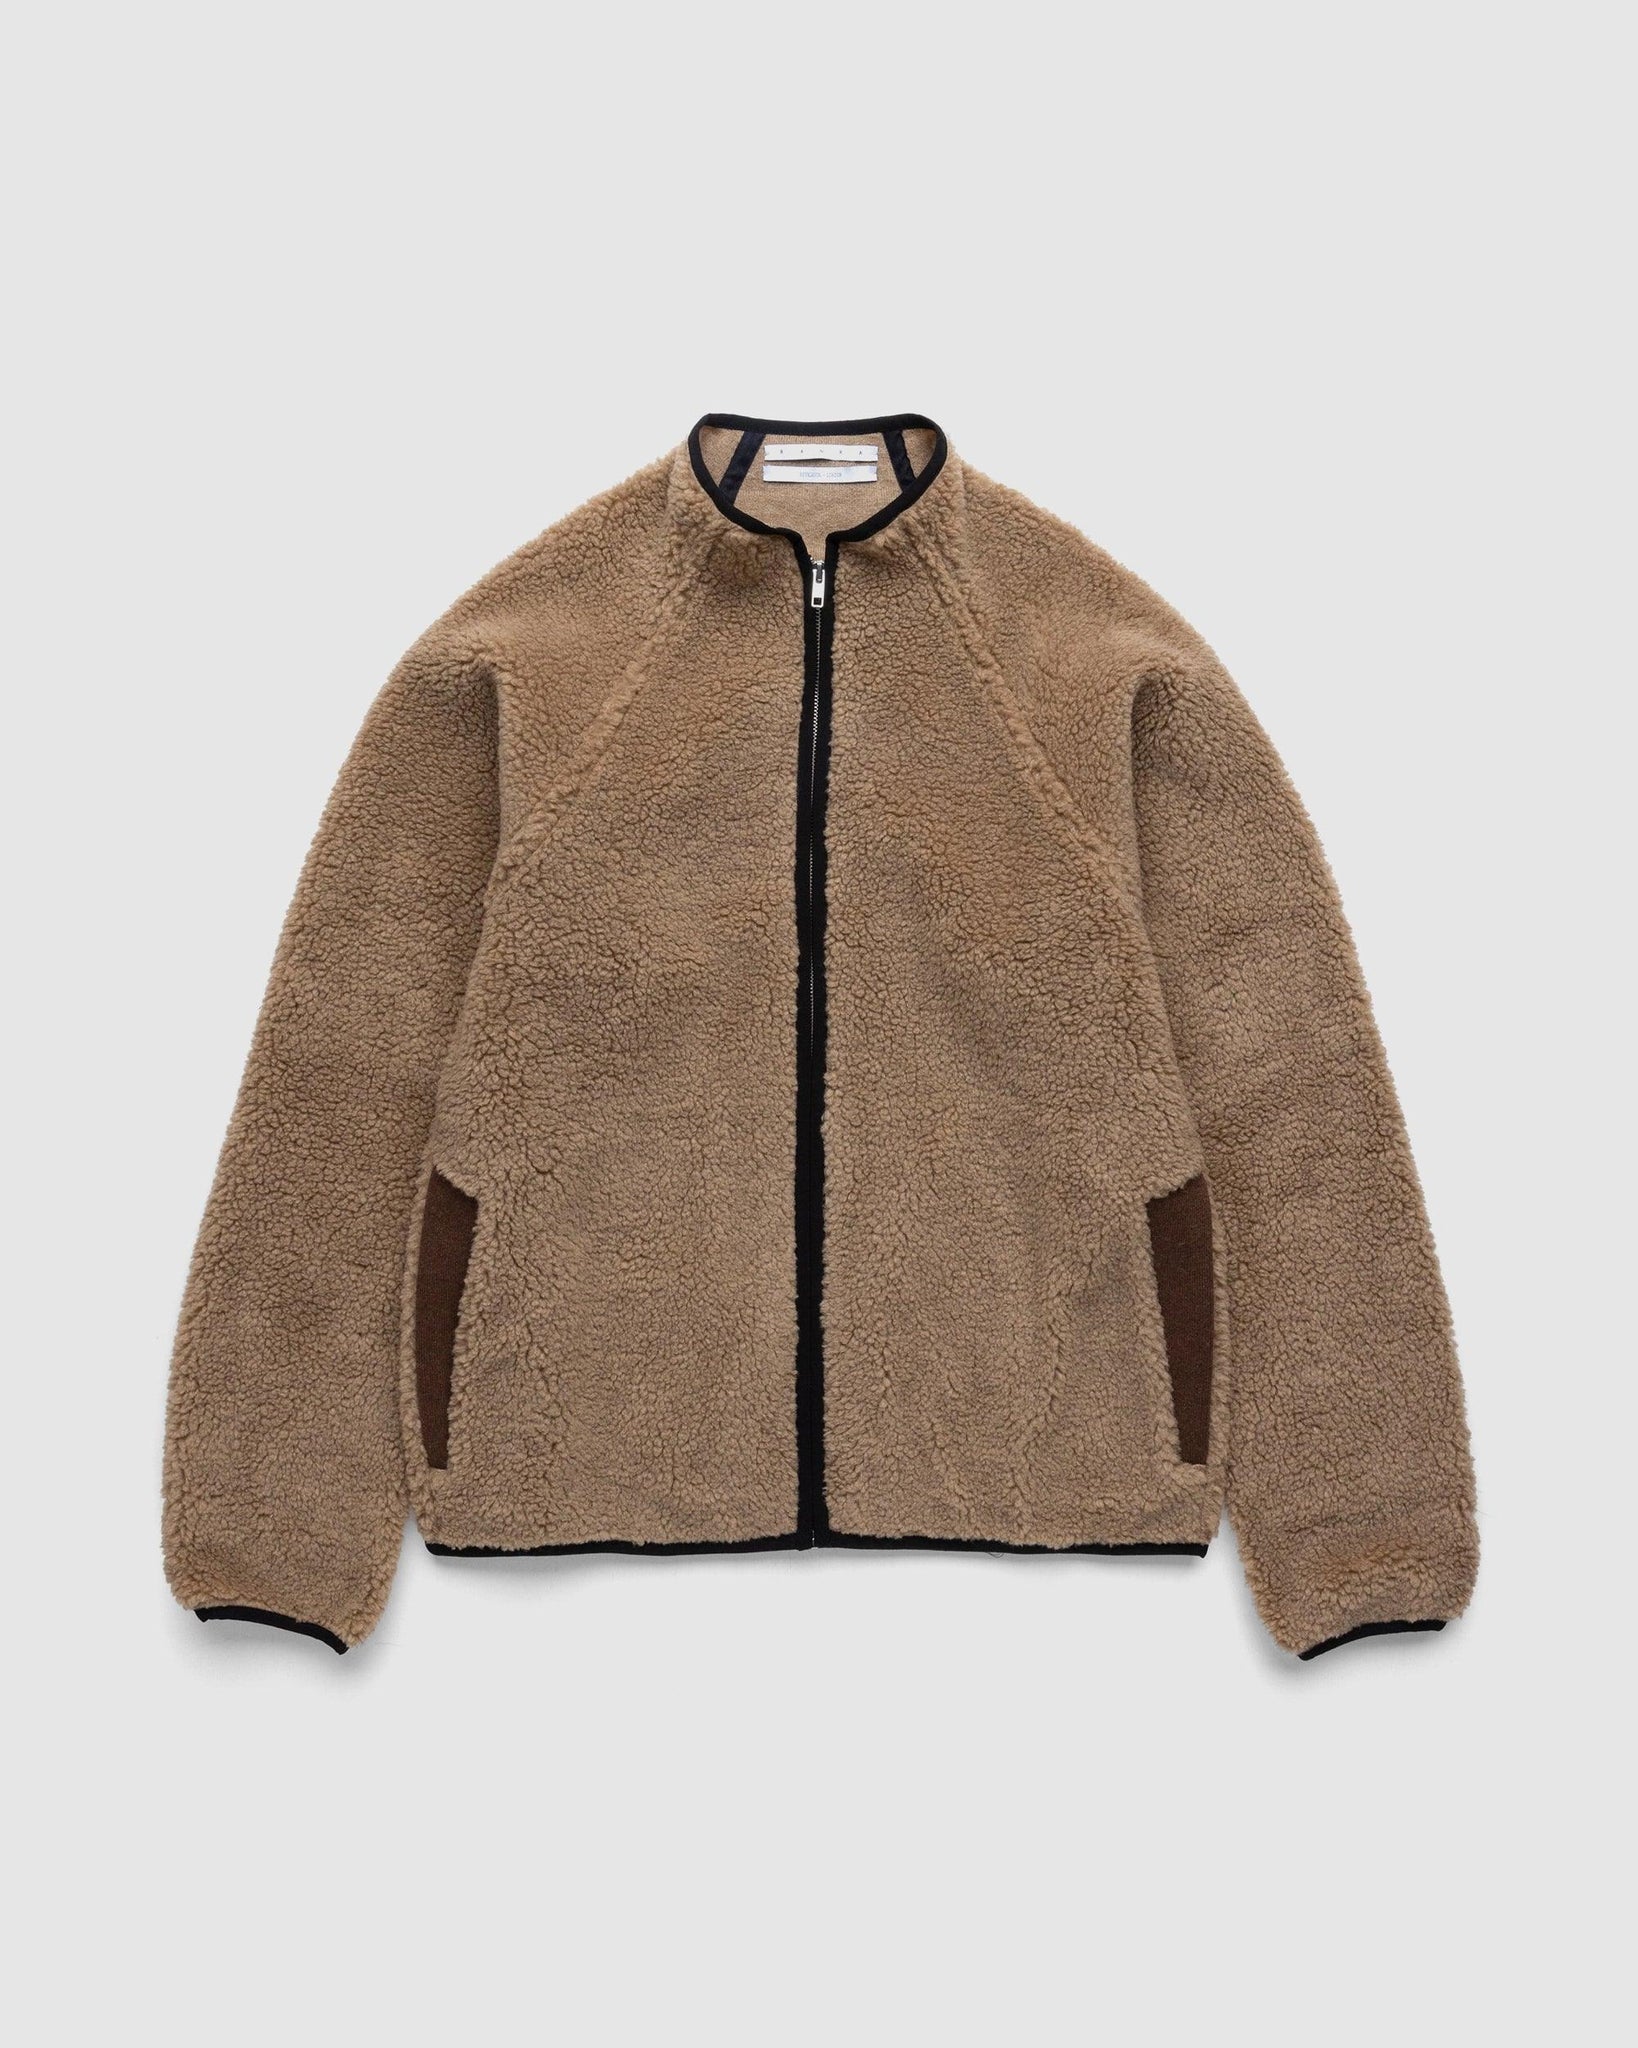 Gjof Fleece Jacket - {{ collection.title }} - Chinatown Country Club 